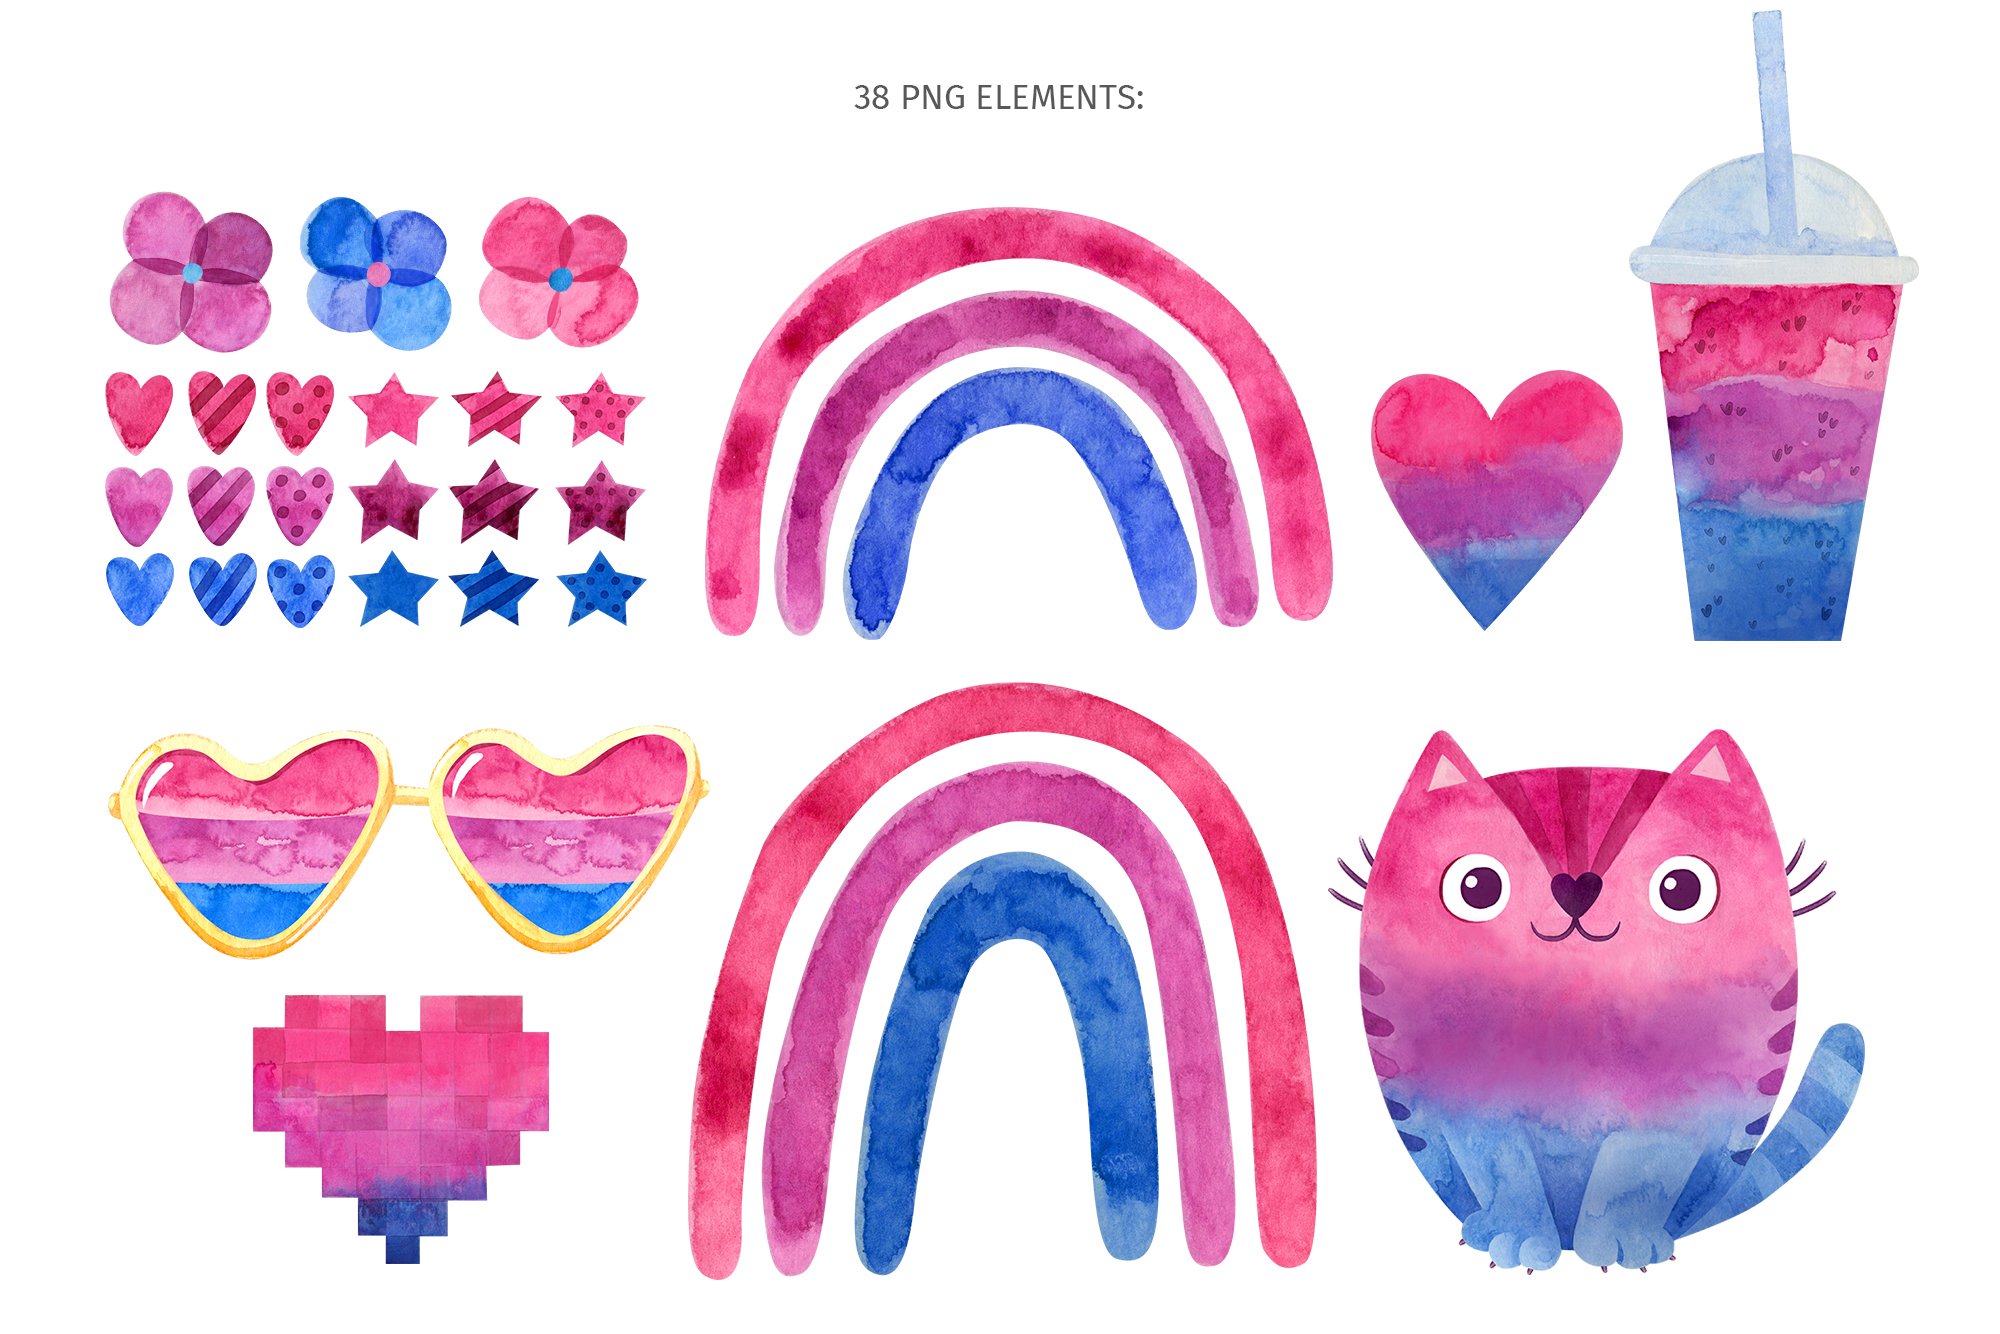 Bisexual pride clipart and patterns preview image.